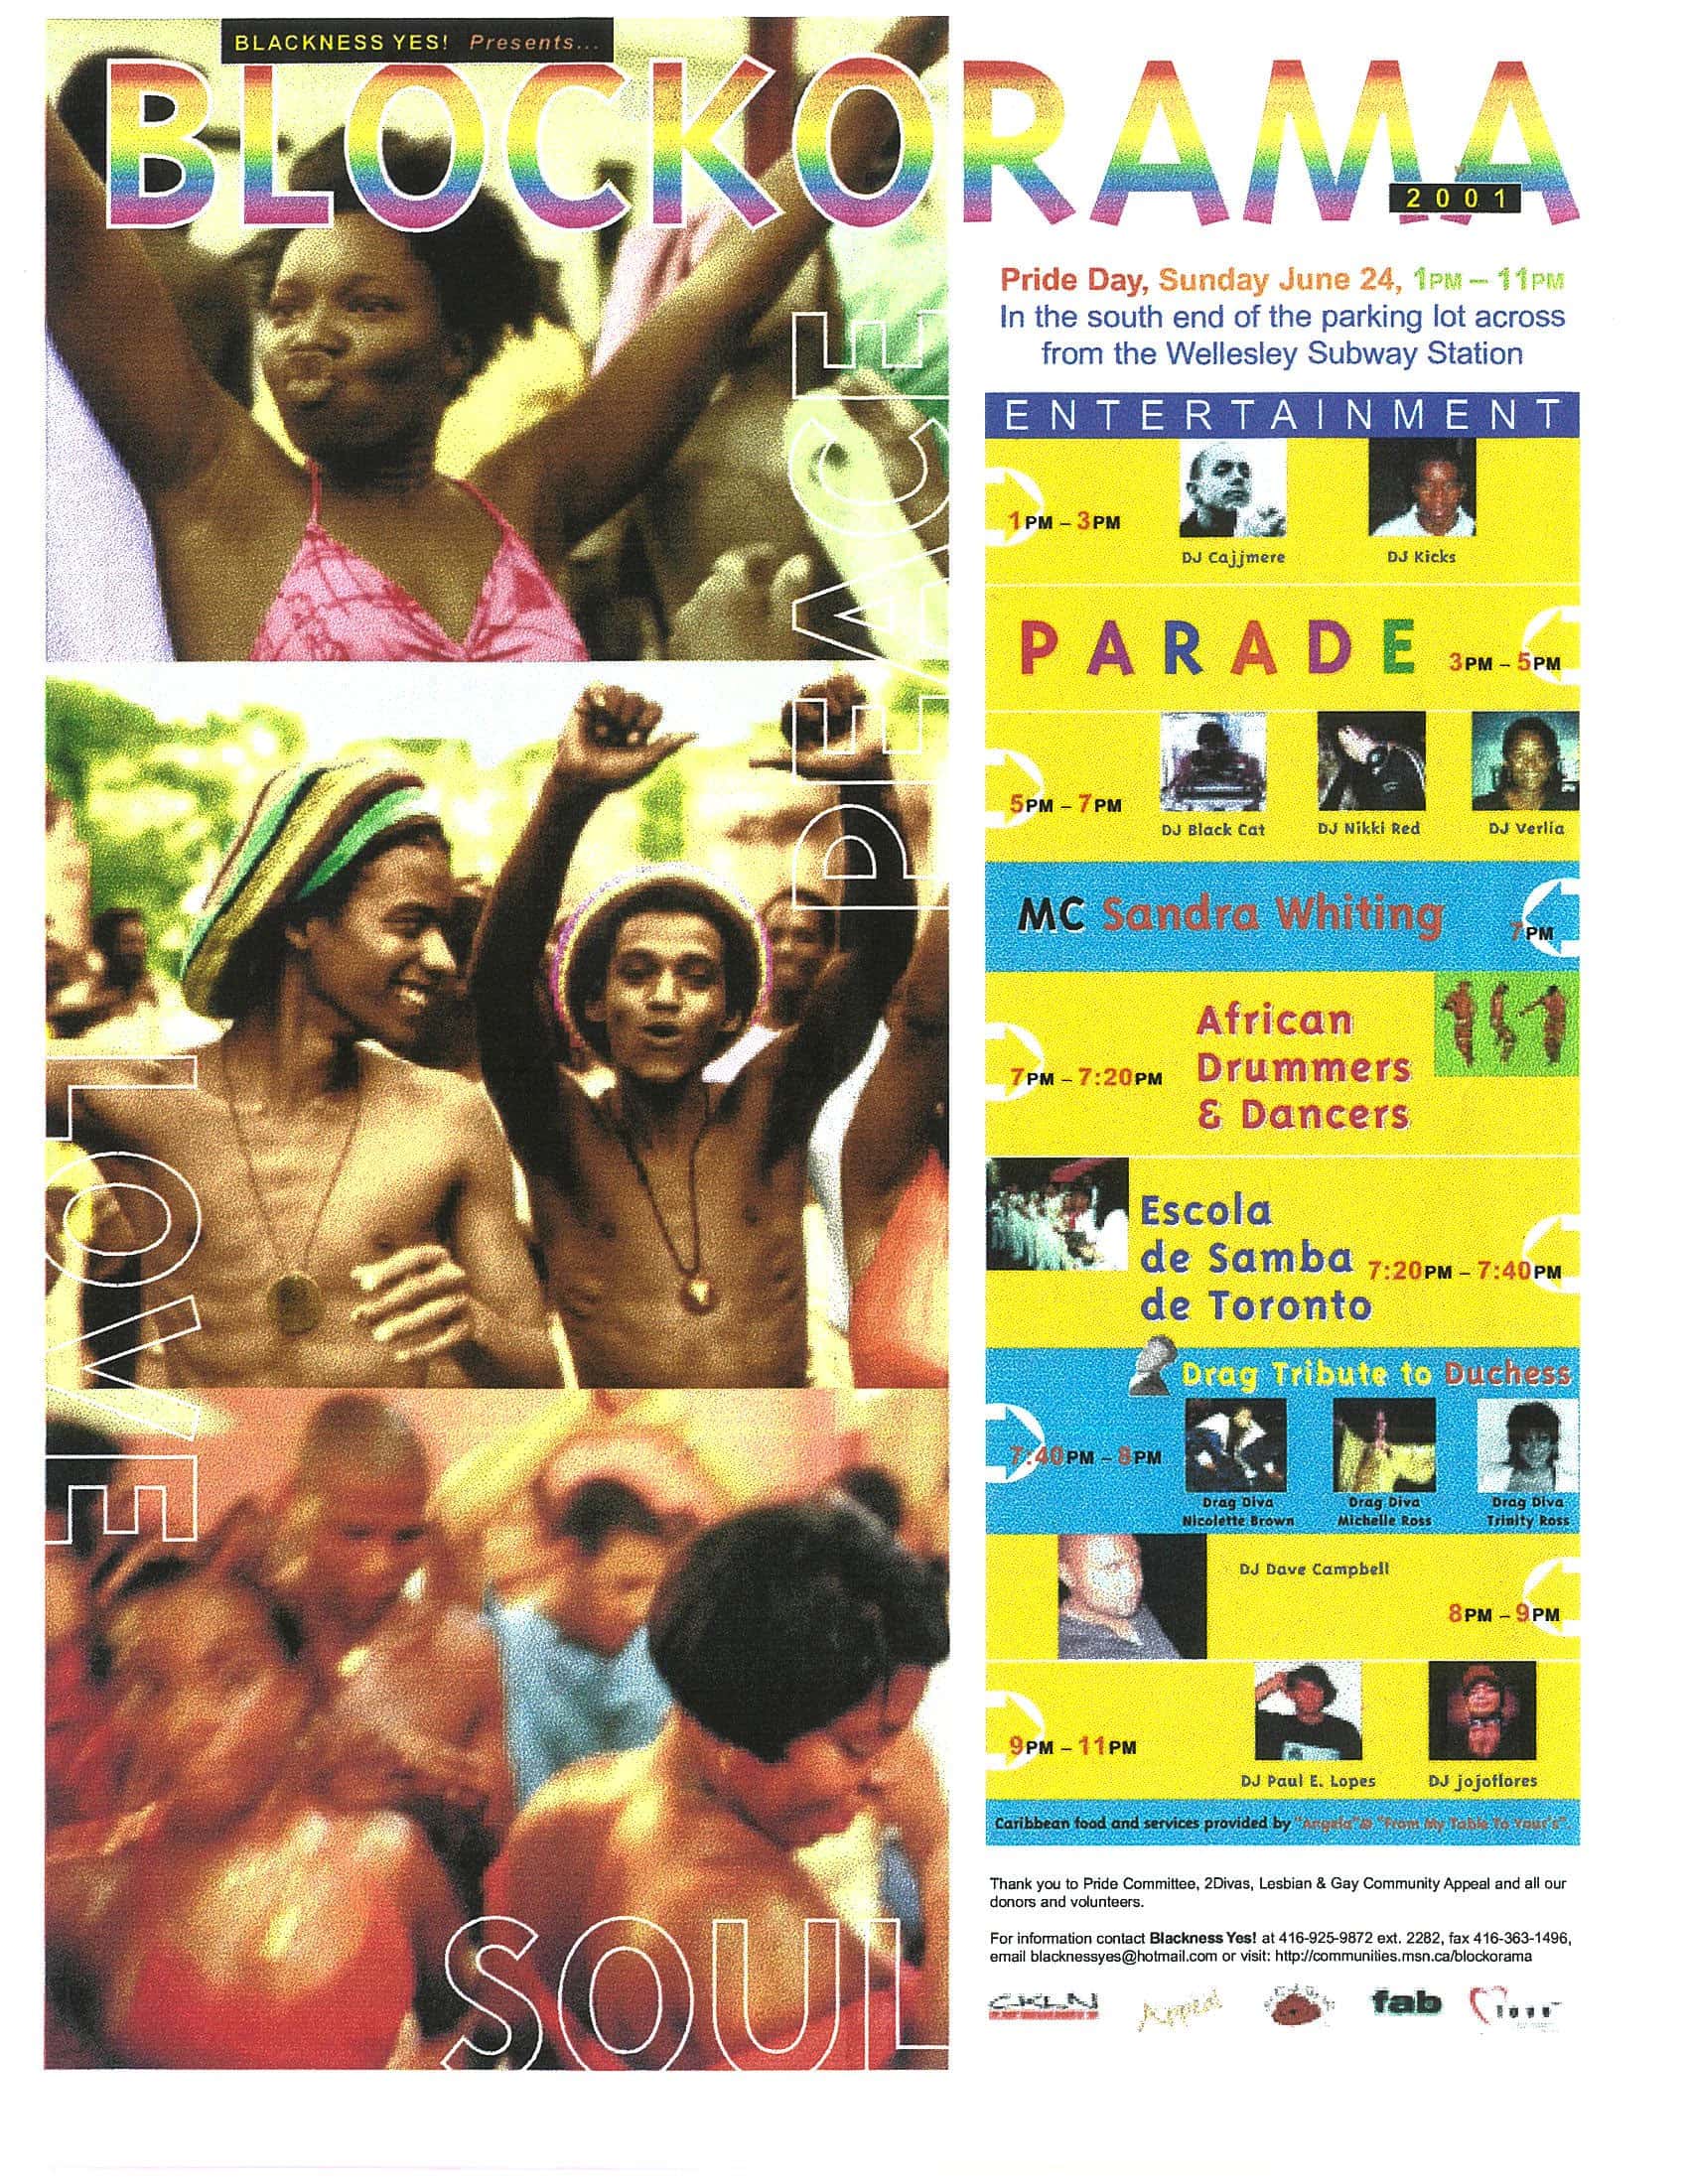 Pamphlet with the text “Blockorama” printed in a rainbow gradient font and “peace,” “love,” and “soul,” printed in a white outline font. At the top left is a photo of a person with short curly hair wearing a pink halter top with their arms up. Below that is a photo of two people with their shirts off wearing hats and pendant necklaces. At the bottom is an out-of-focus photo of people dancing. Event information, including dates, times, locations, performers, and small photos, is listed on the right.